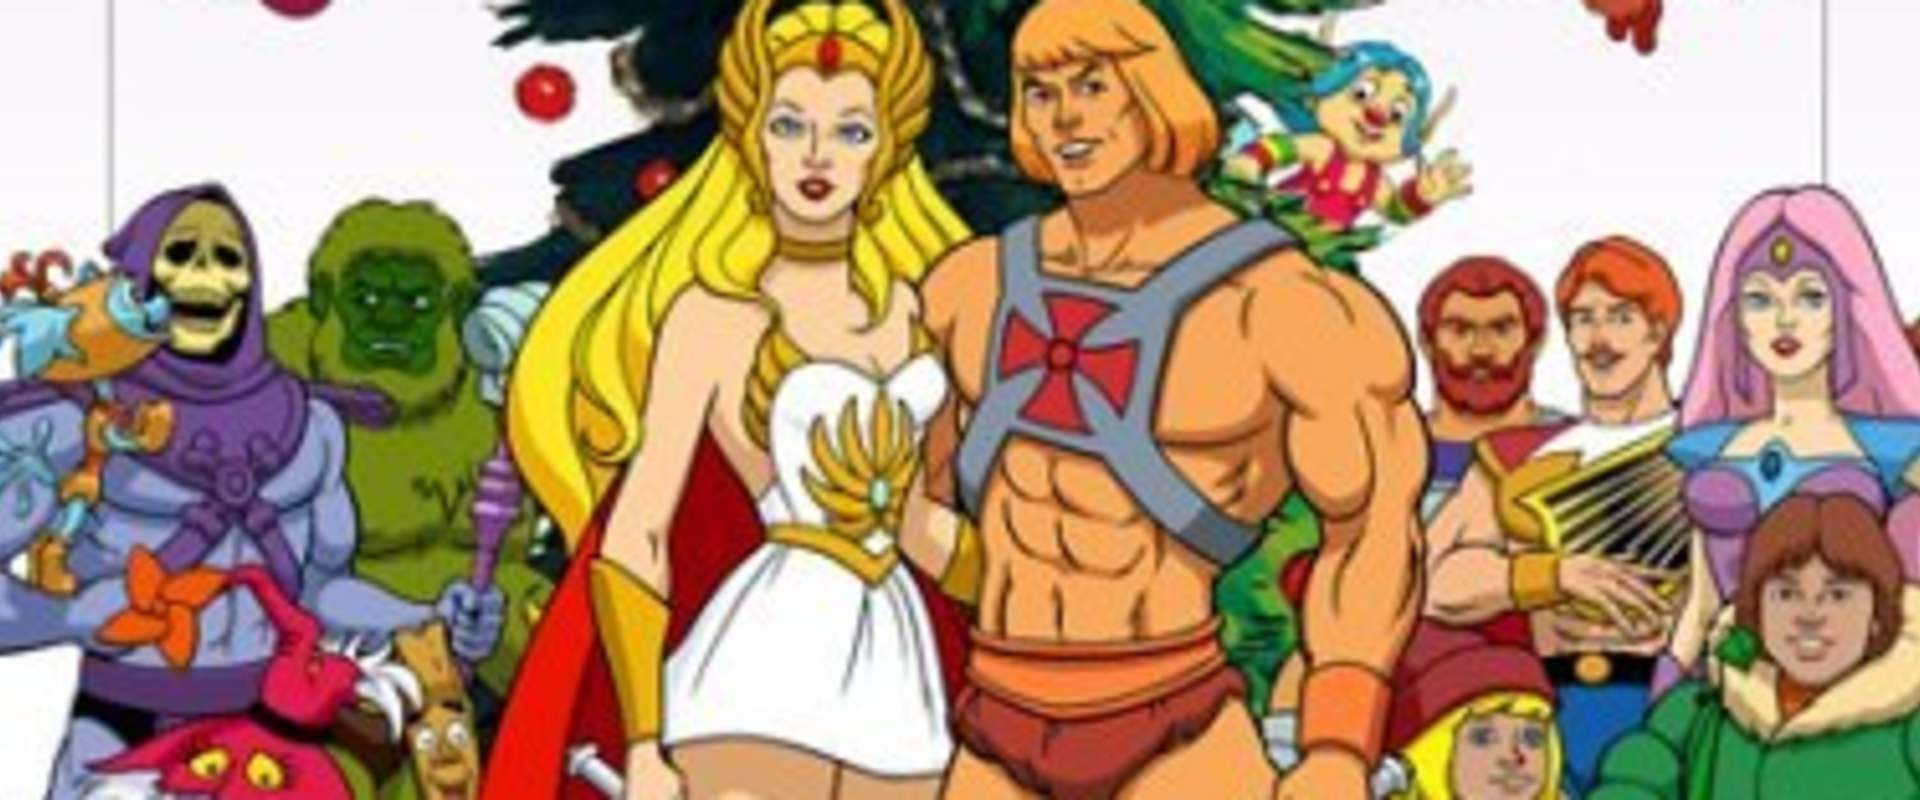 He-Man and She-Ra: A Christmas Special background 2